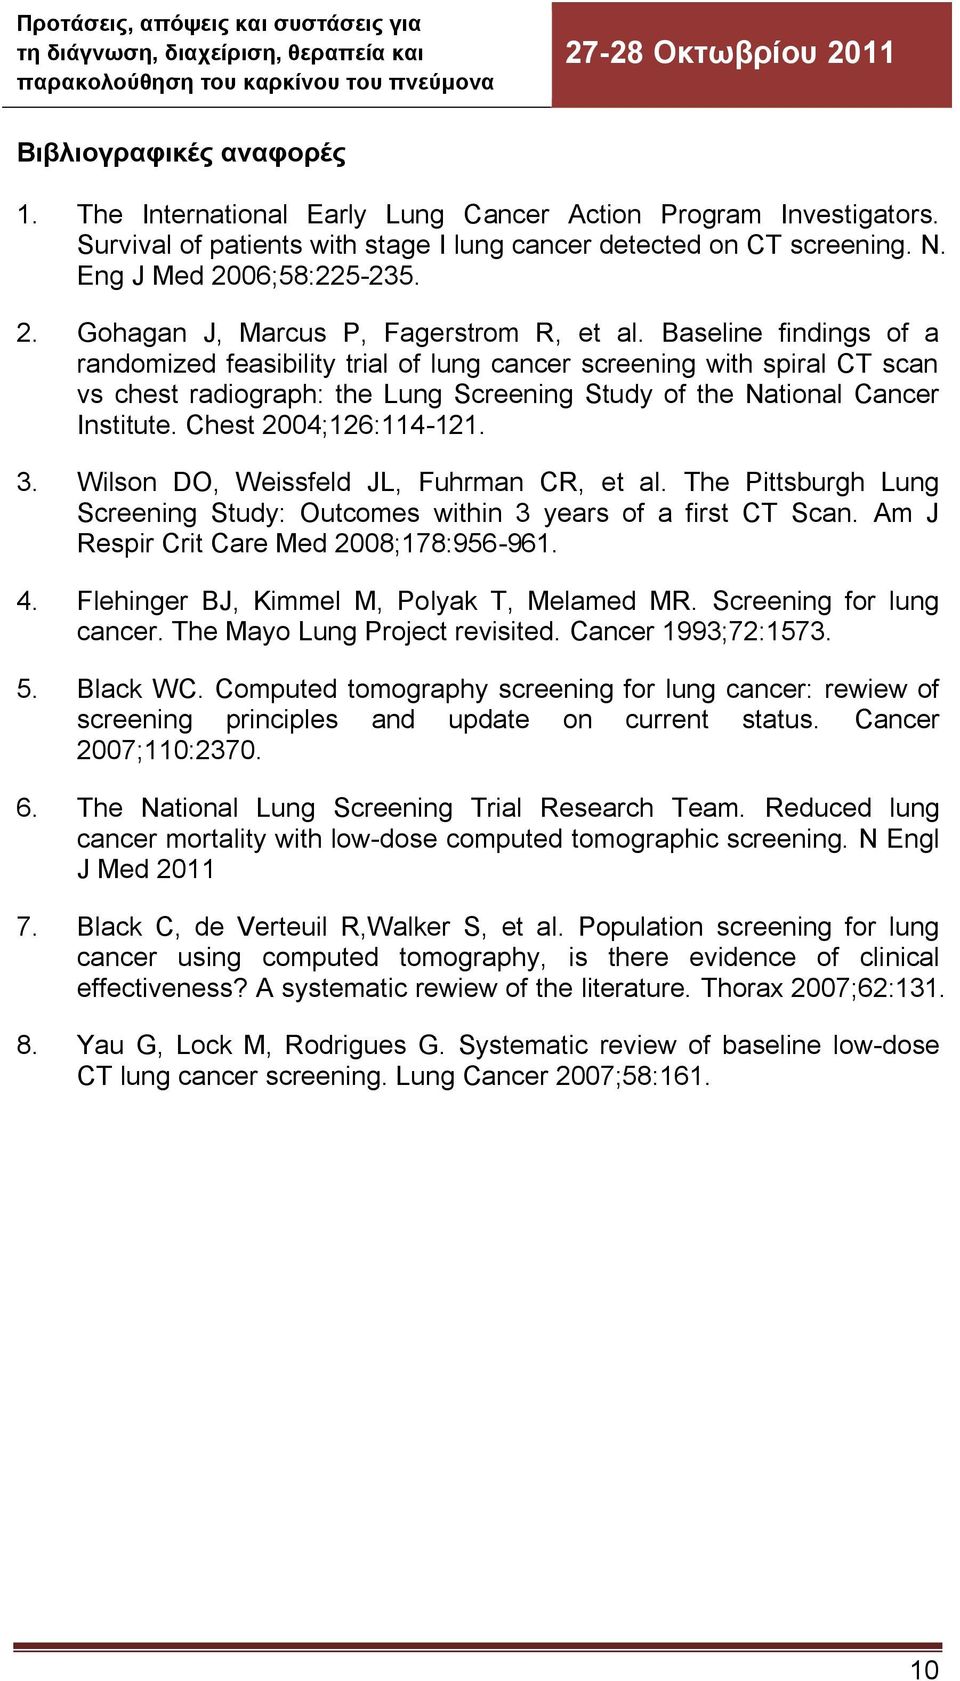 Baseline findings of a randomized feasibility trial of lung cancer screening with spiral CT scan vs chest radiograph: the Lung Screening Study of the National Cancer Institute. Chest 2004;126:114-121.